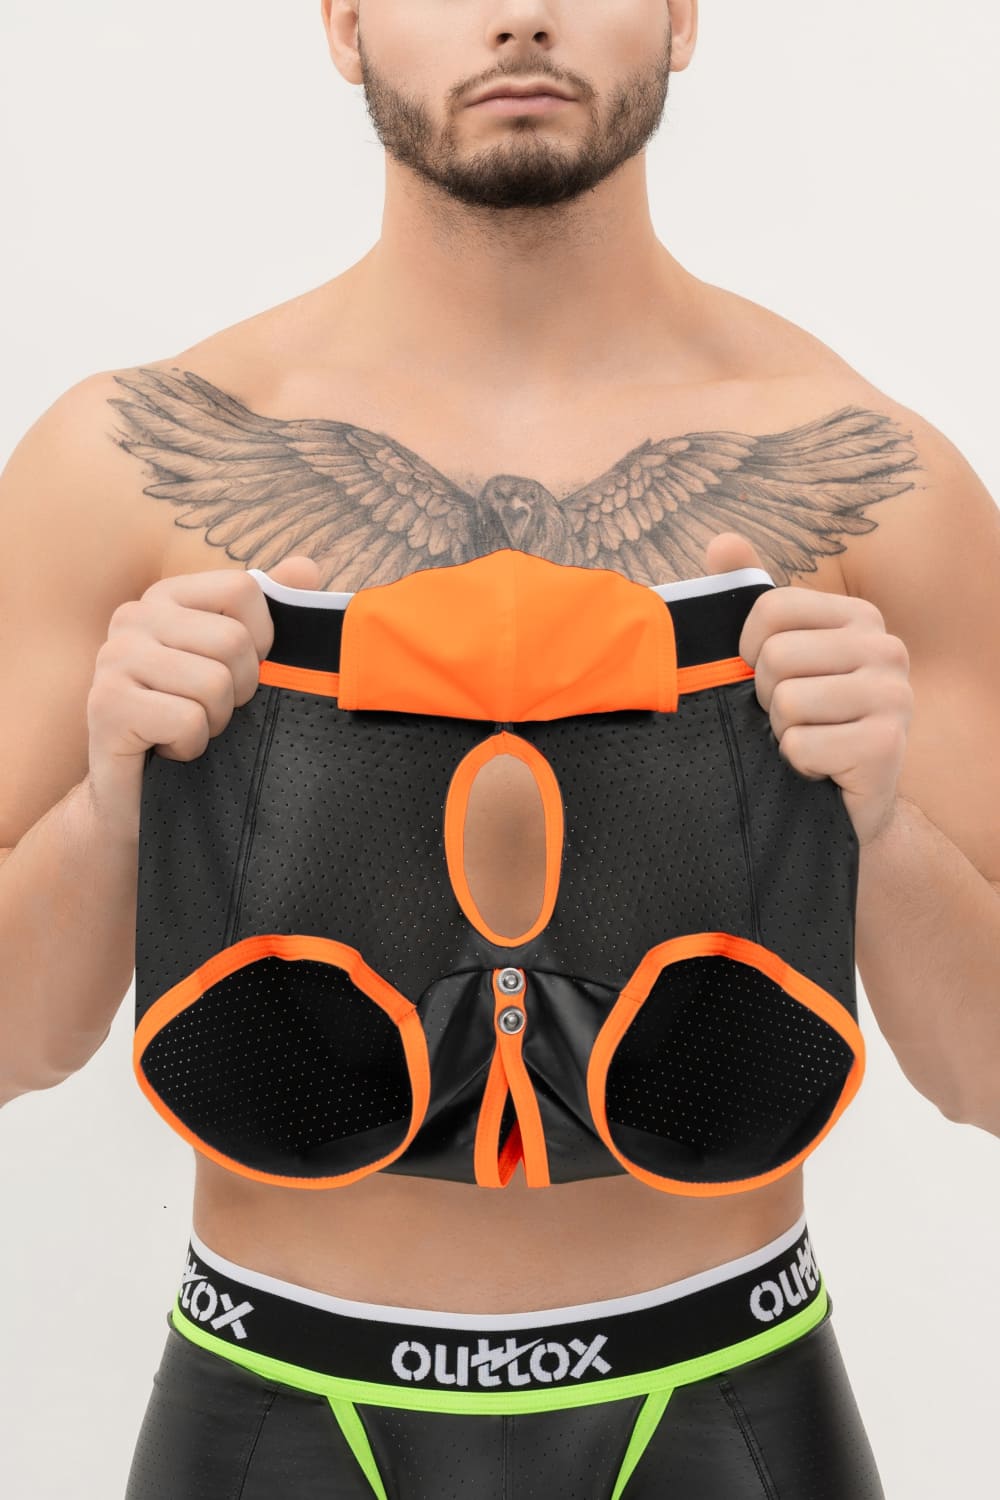 Outtox. Wrapped Rear Trunk Shorts with Snap Codpiece. Black+Orange